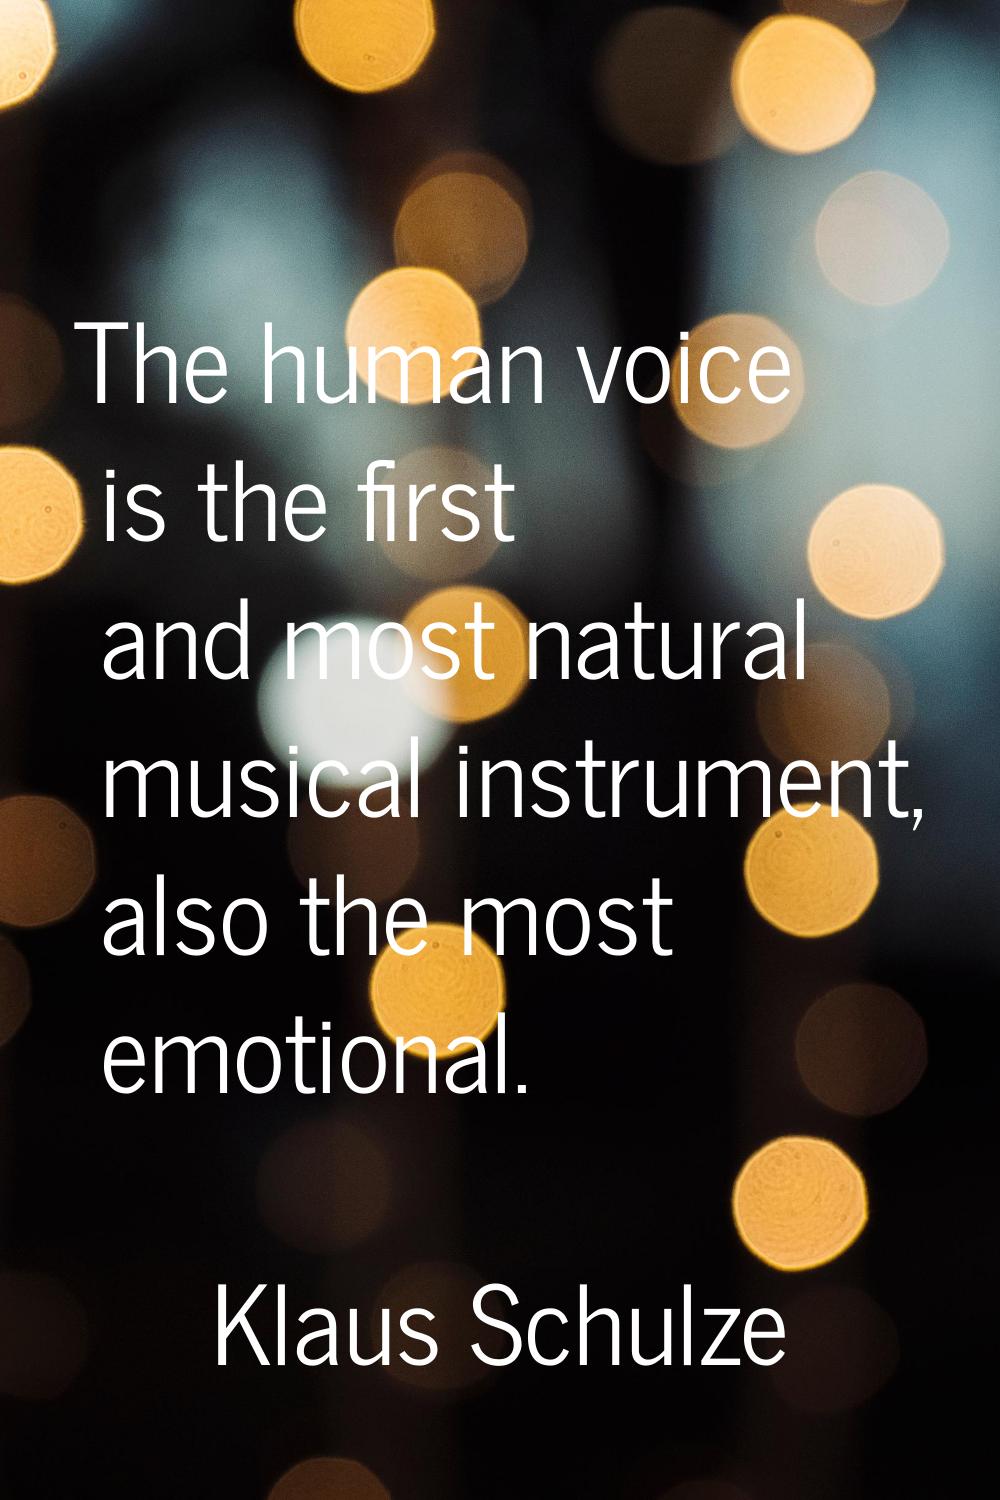 The human voice is the first and most natural musical instrument, also the most emotional.